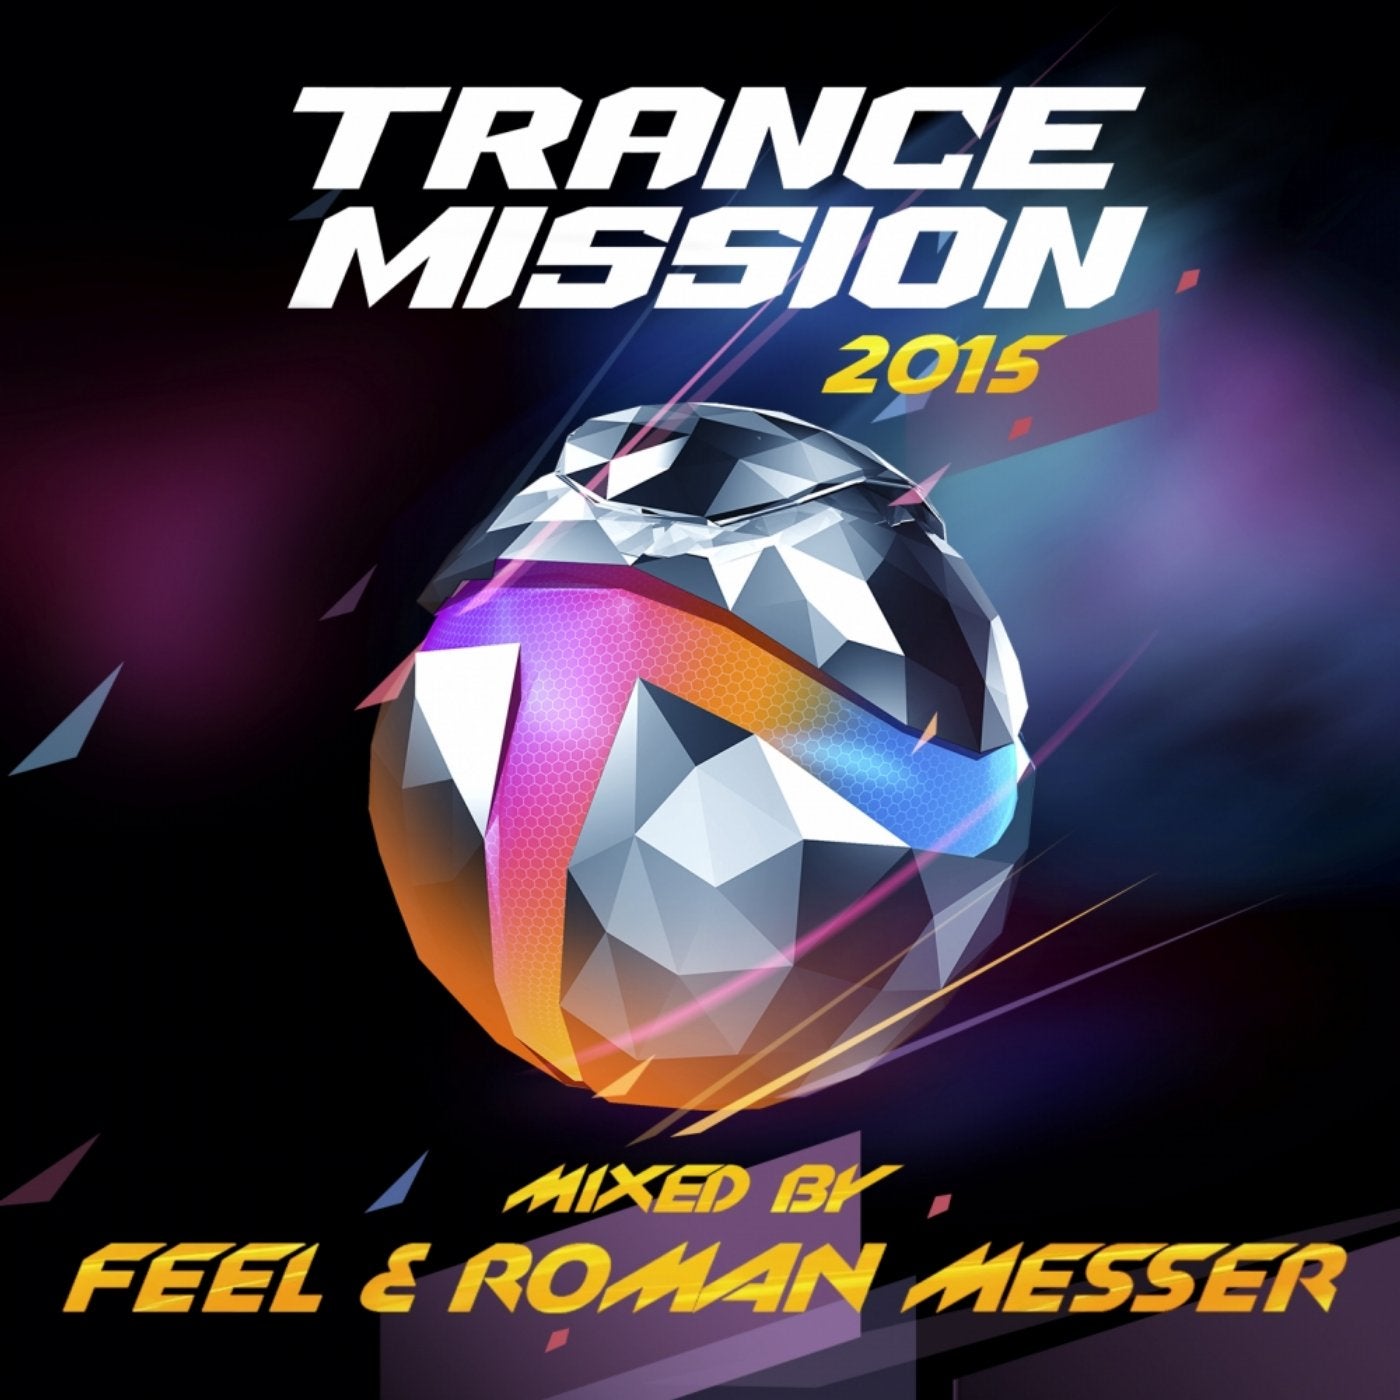 TranceMission 2015: Mixed By Feel & Roman Messer